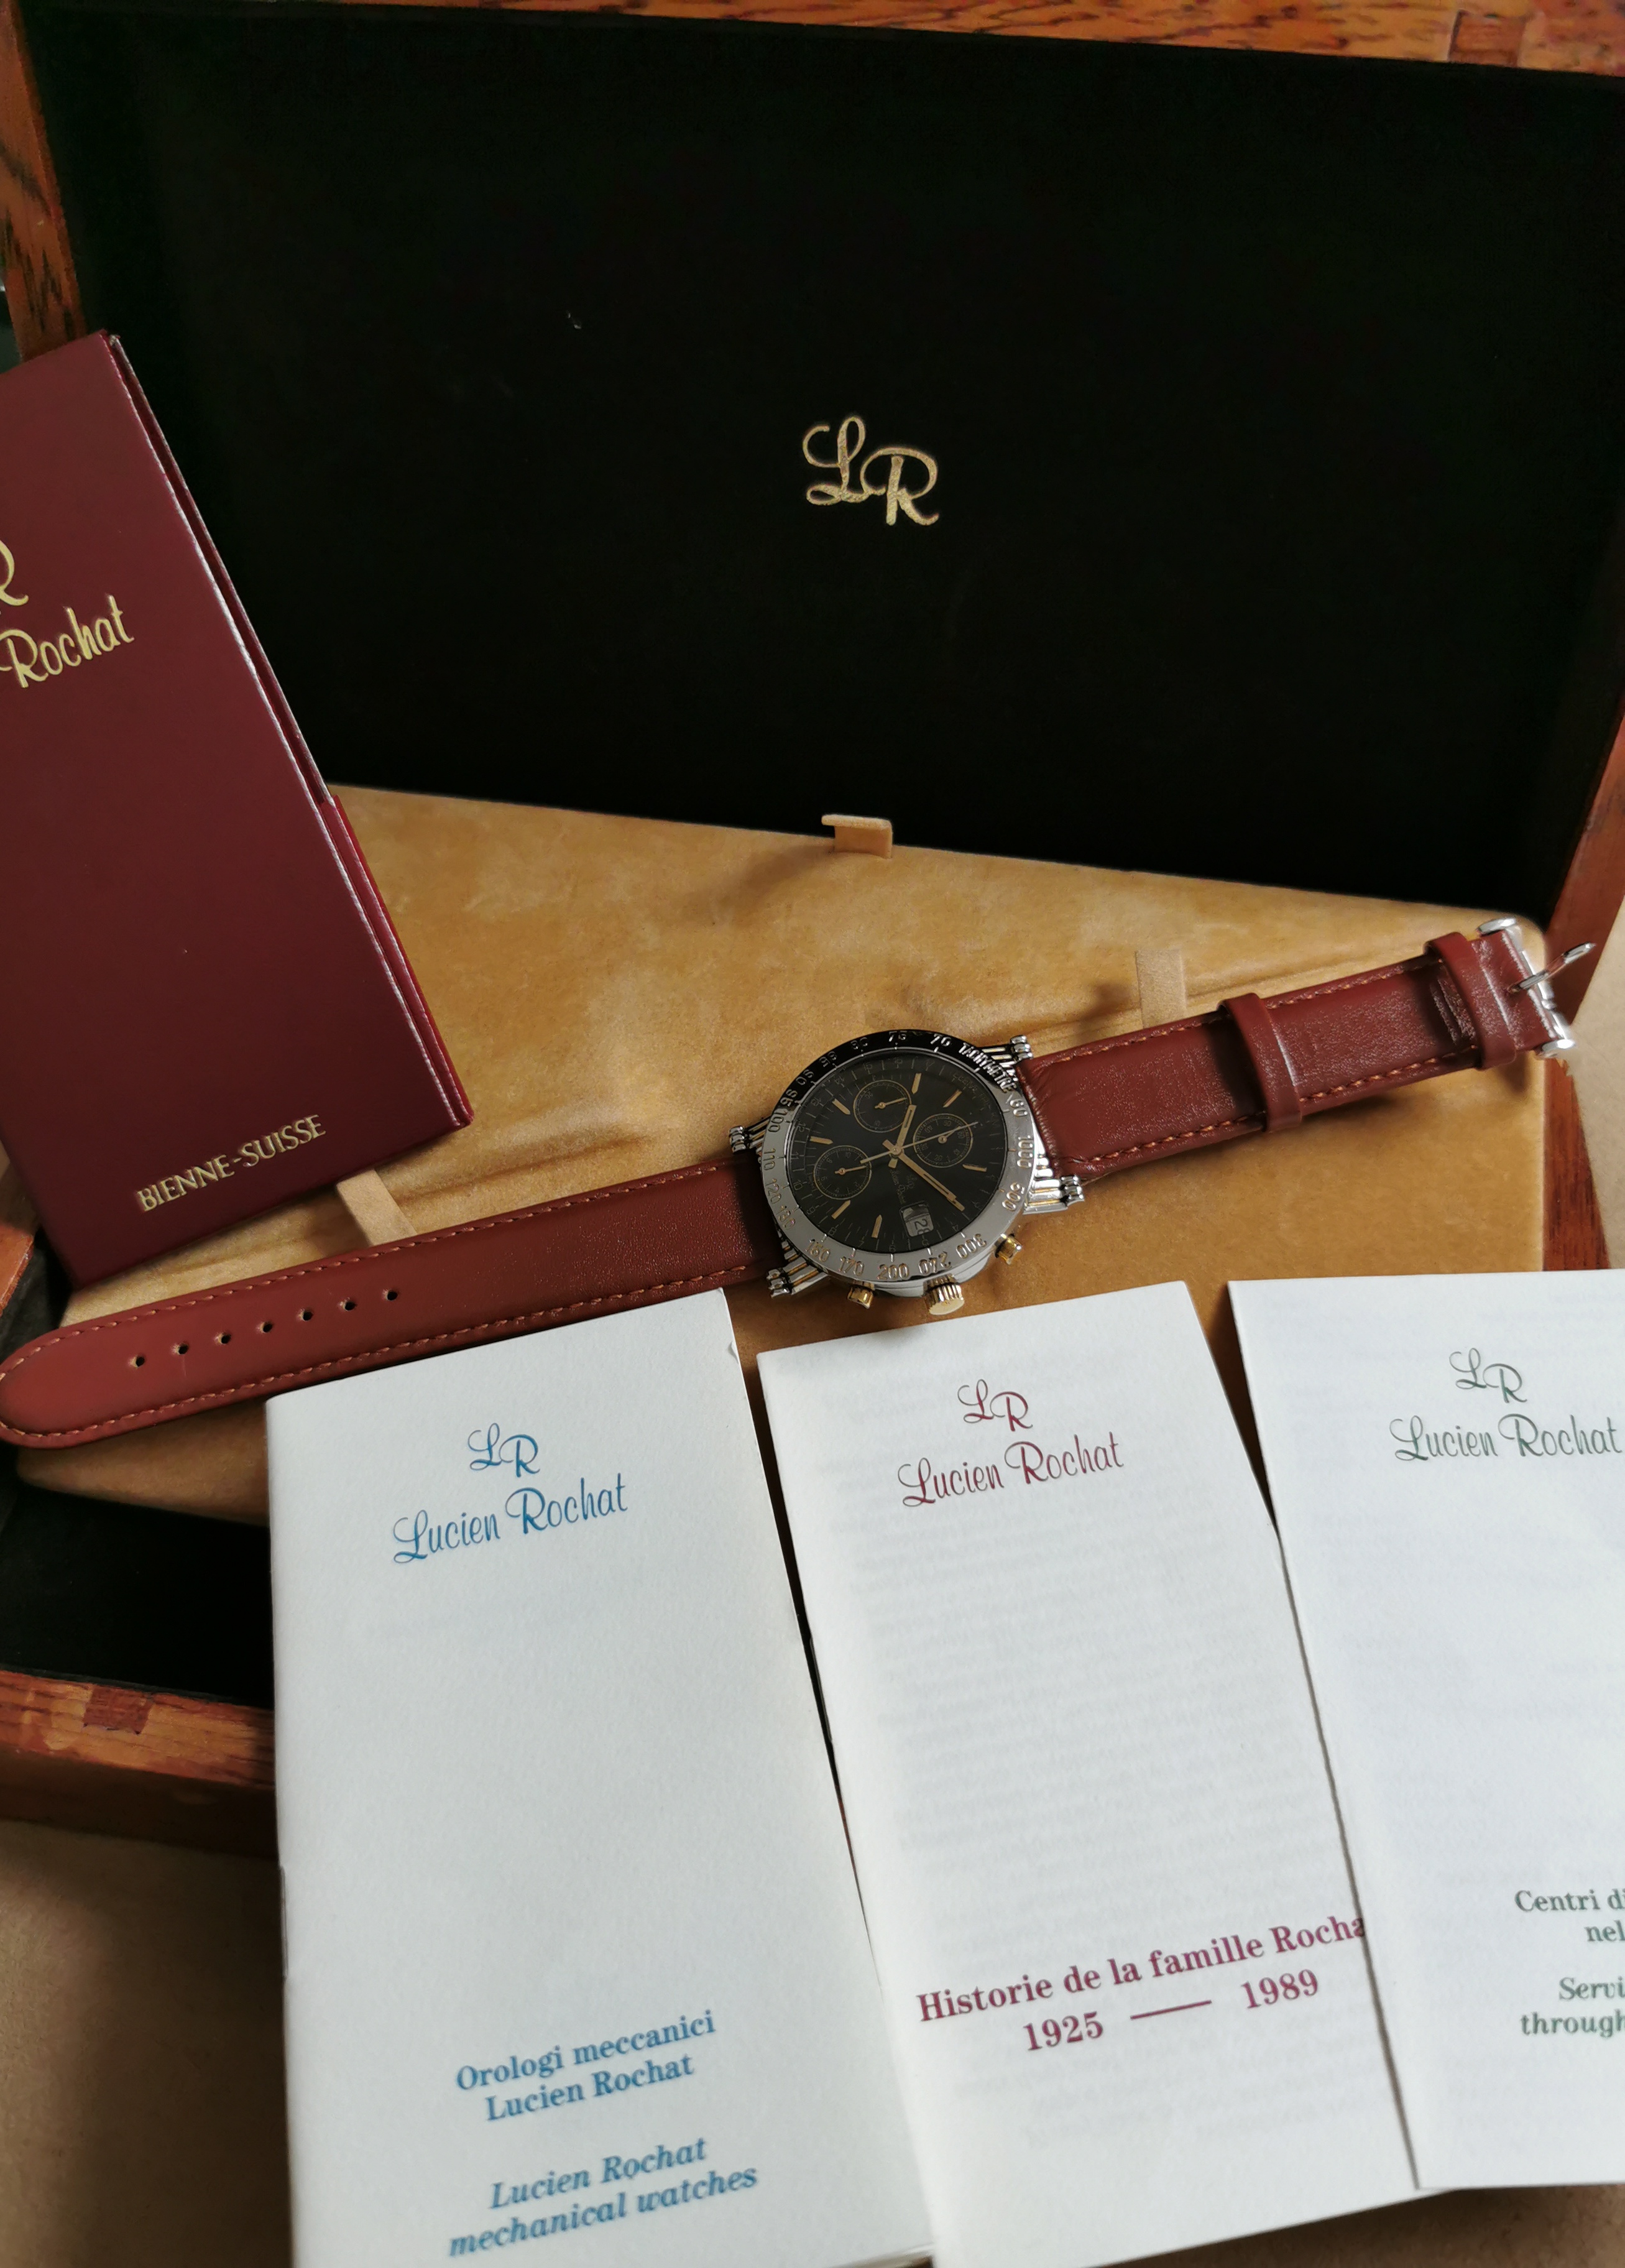 Lucien Rochat Chrono Automatic - 21463047 - stainless steel mm 40 - box and booklets | San Giorgio a Cremano